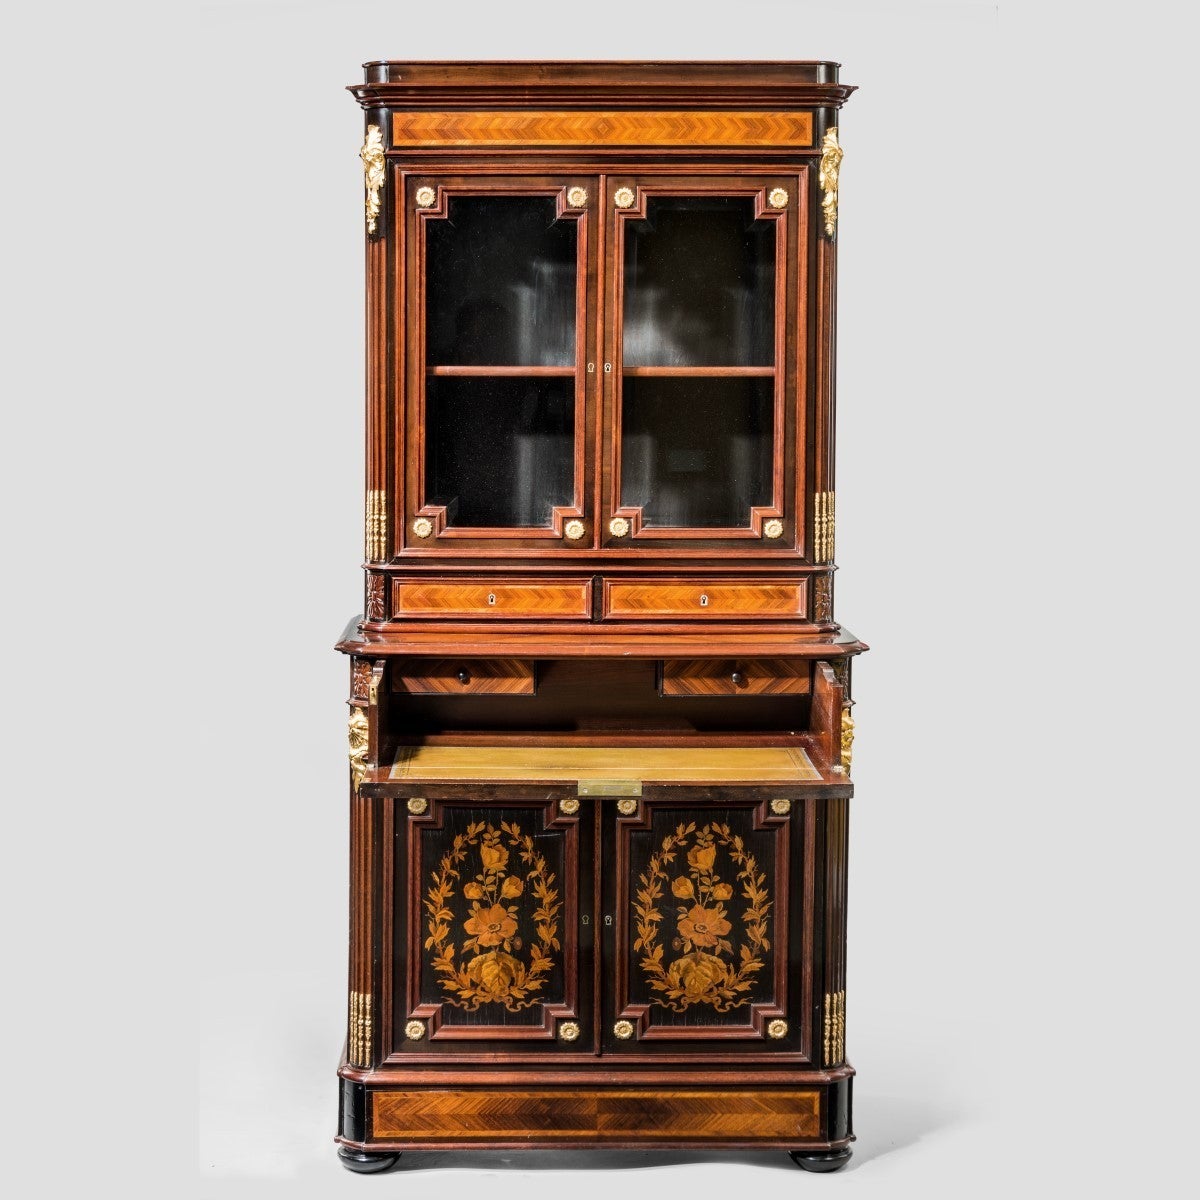 A superb quality Napoleon III kingwood bookcase of unusually small proportions, with a glazed upper section, a fitted secretaire drawer and a cupboard below enclosing an adjustable shelf, decorated throughout with striking quarter veneers, ormolu